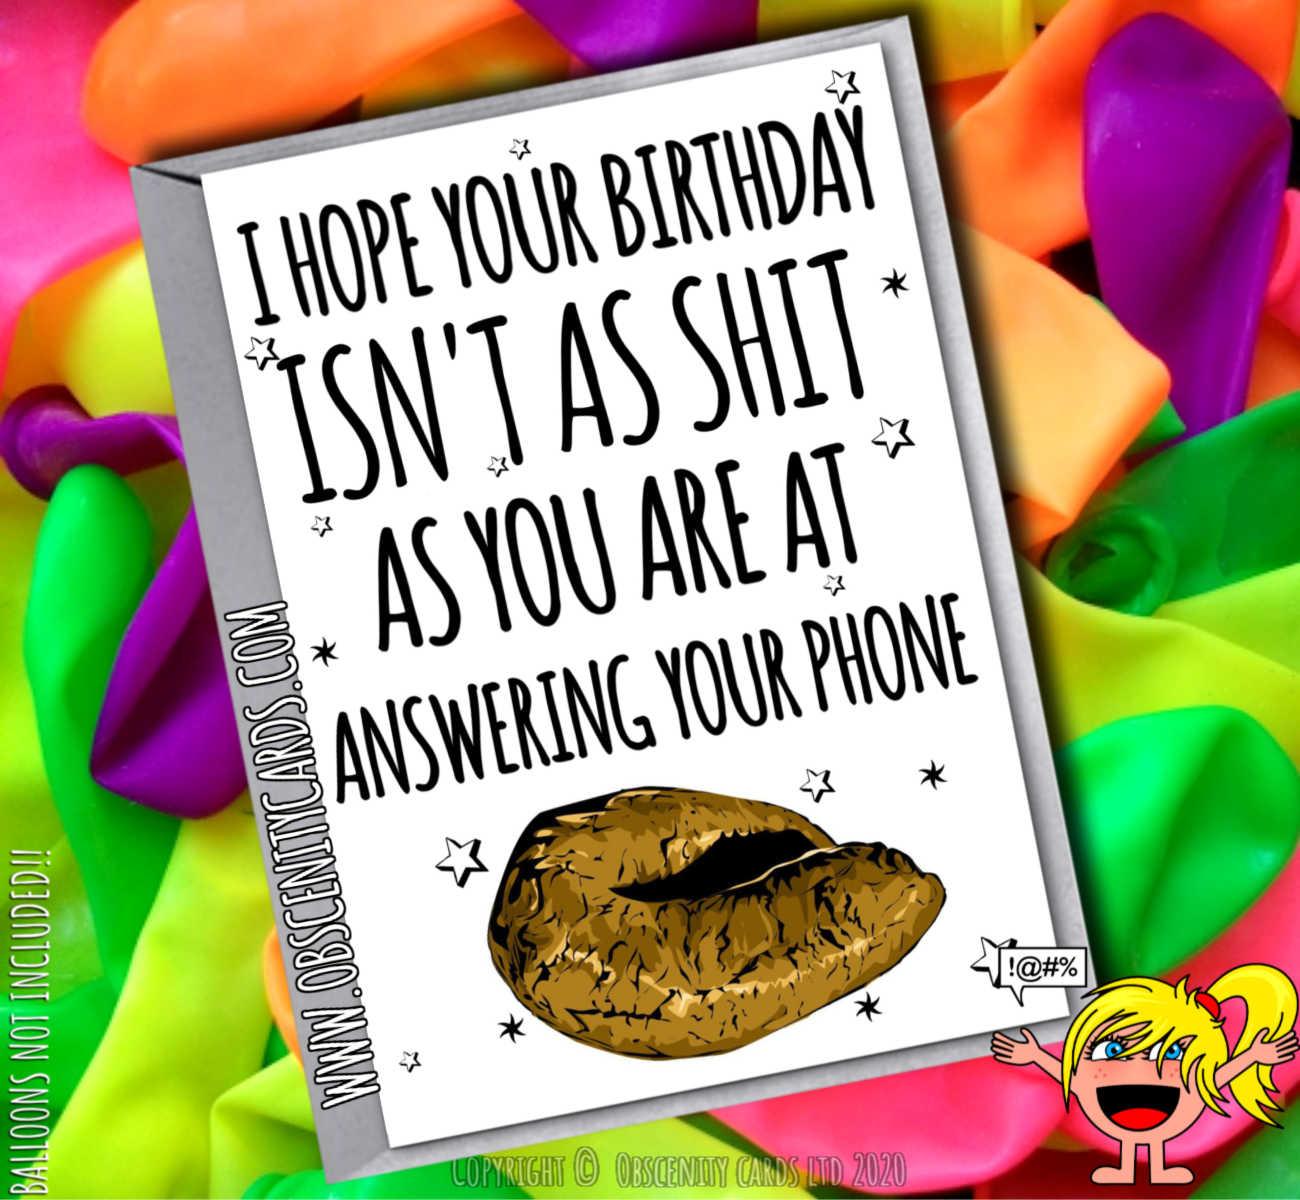 HOPE YOUR BIRTHDAY ISN'T AS SHIT AS YOU ARE AT ANSWERING YOUR PHONE